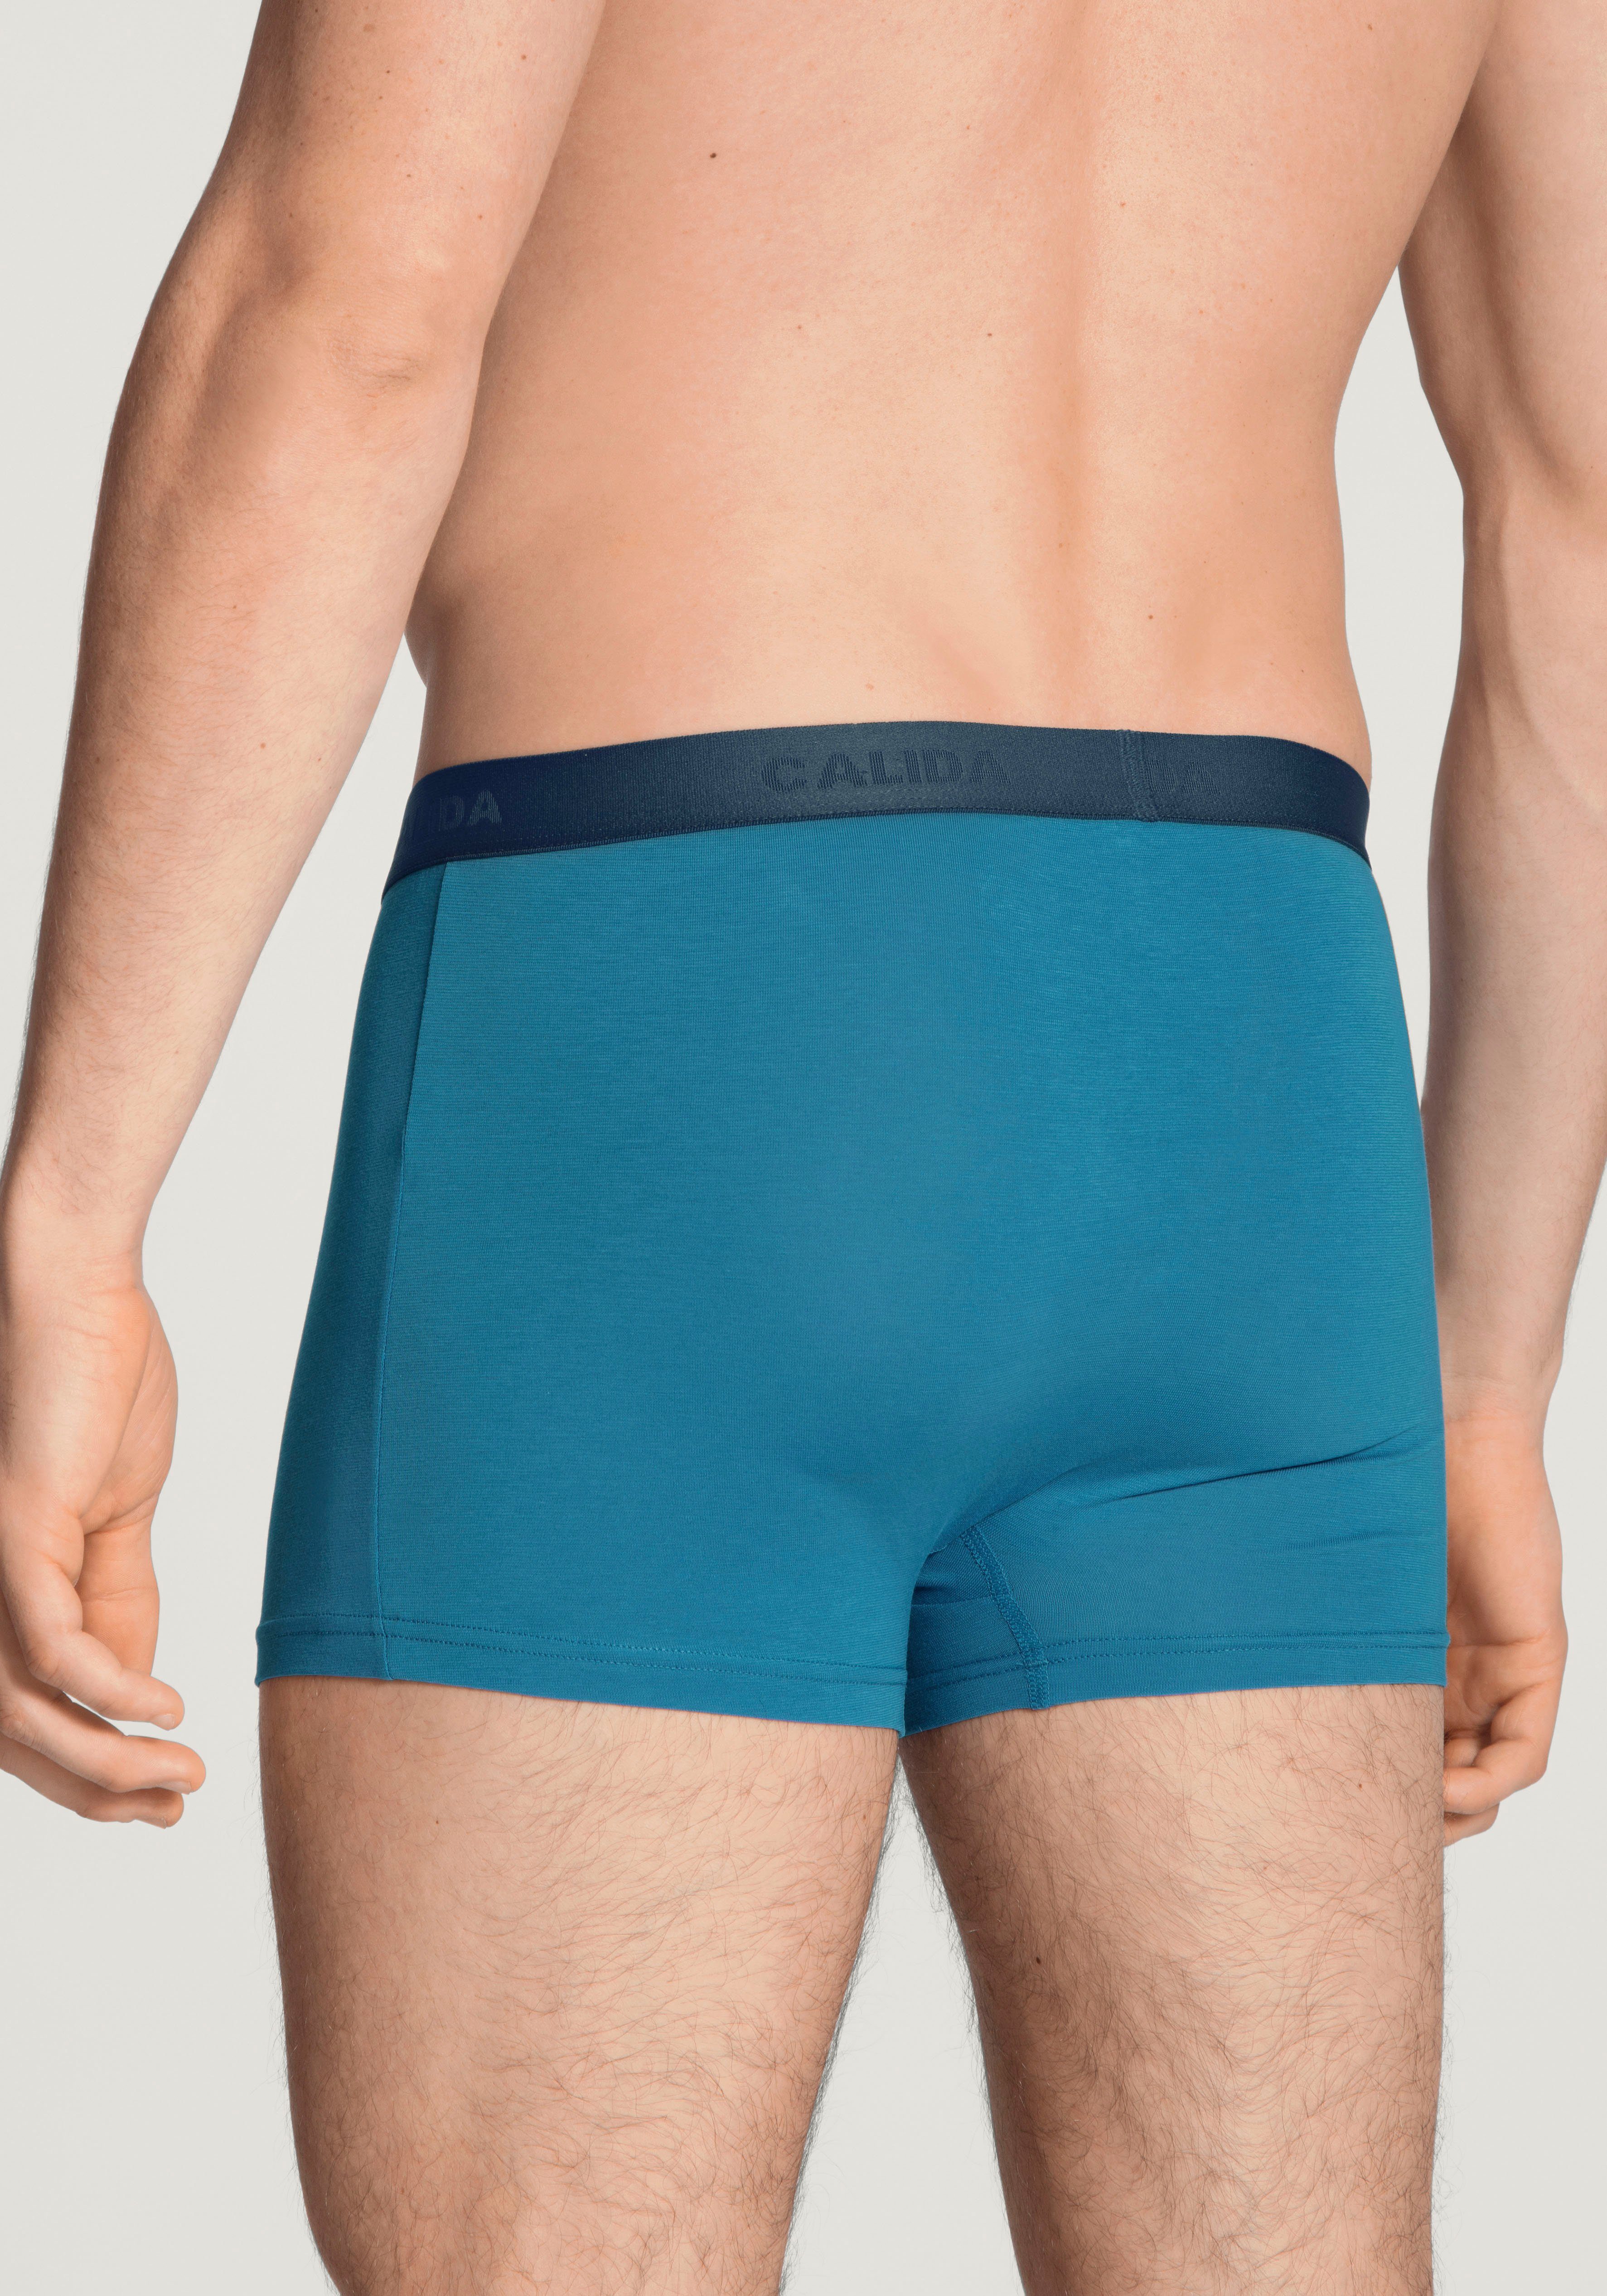 Natural Jersey-Qualität formstabile Benefit CALIDA Single Boxershorts 3-St) mutlicolor Boxer-Brief (Packung,